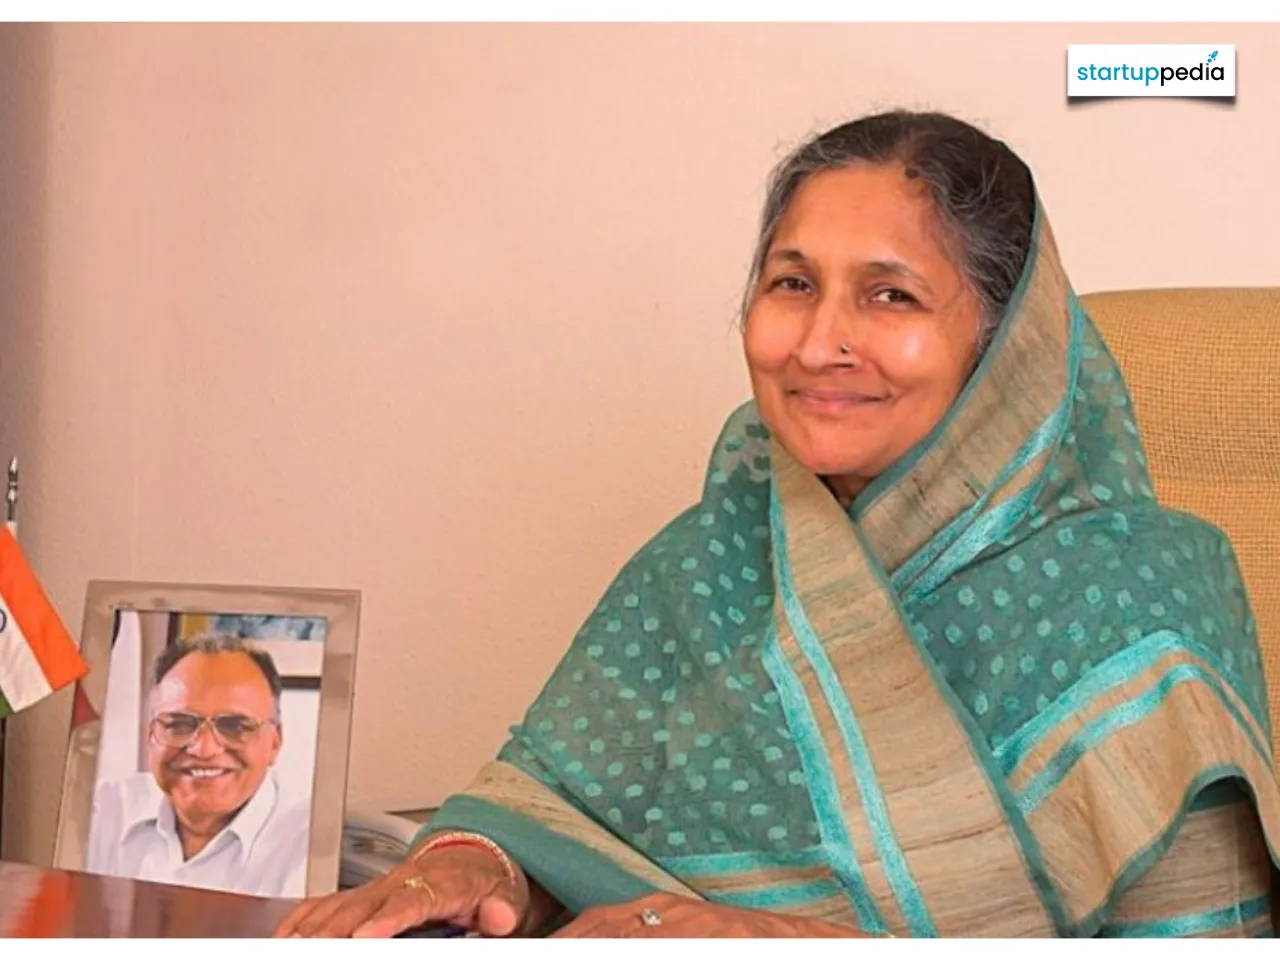 School dropout Savitri Jindal is now the 4th richest person in India